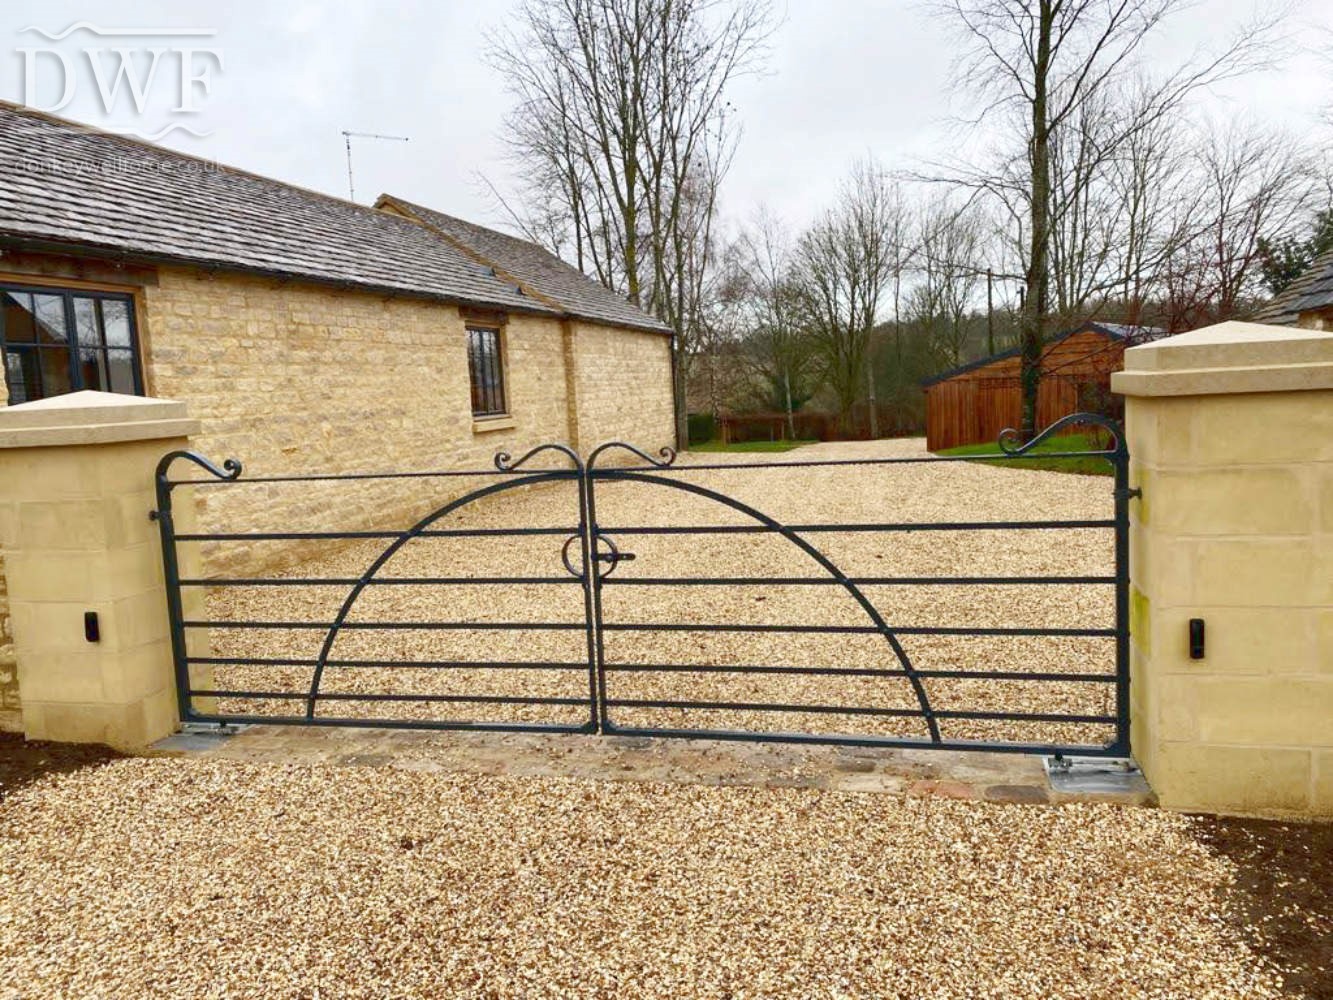 riveting-traditional-forged-driveway-estate-gates-tennoned-swellings